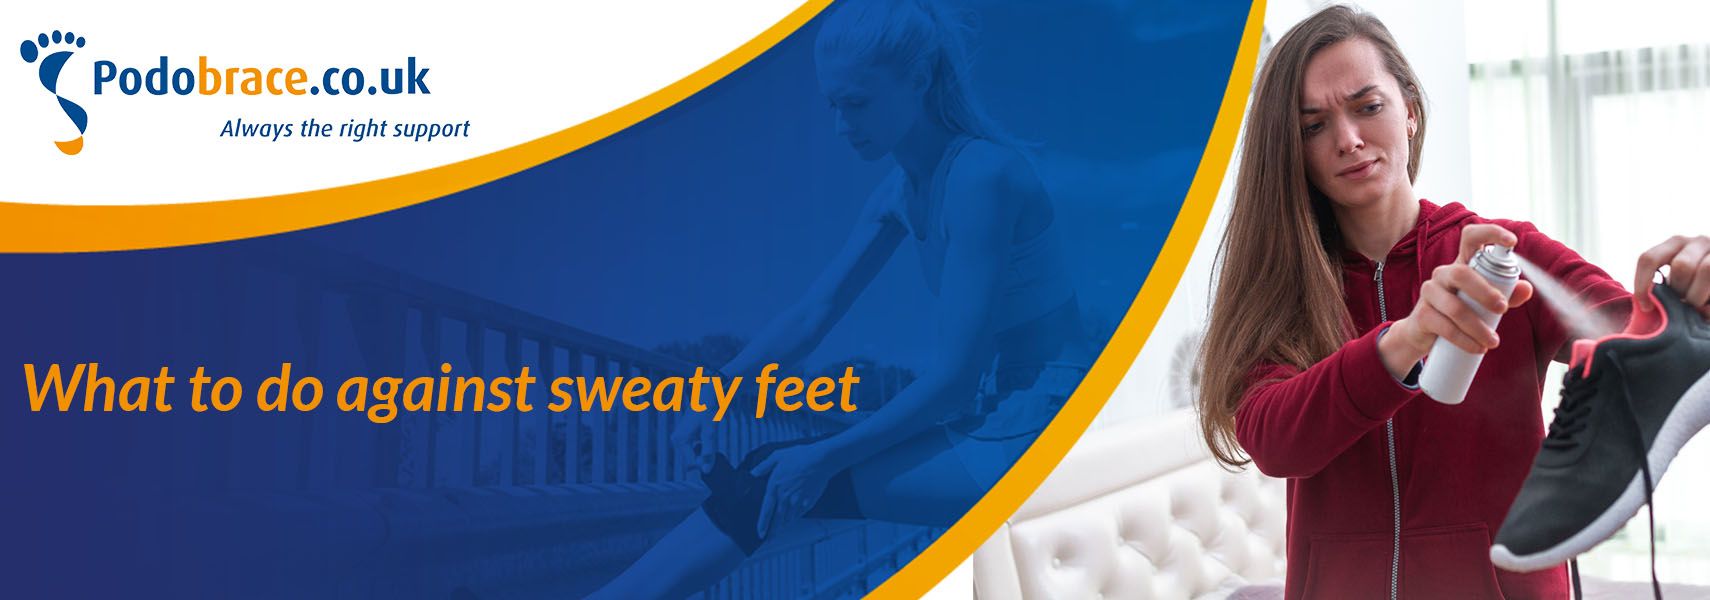 What to do against sweaty feet